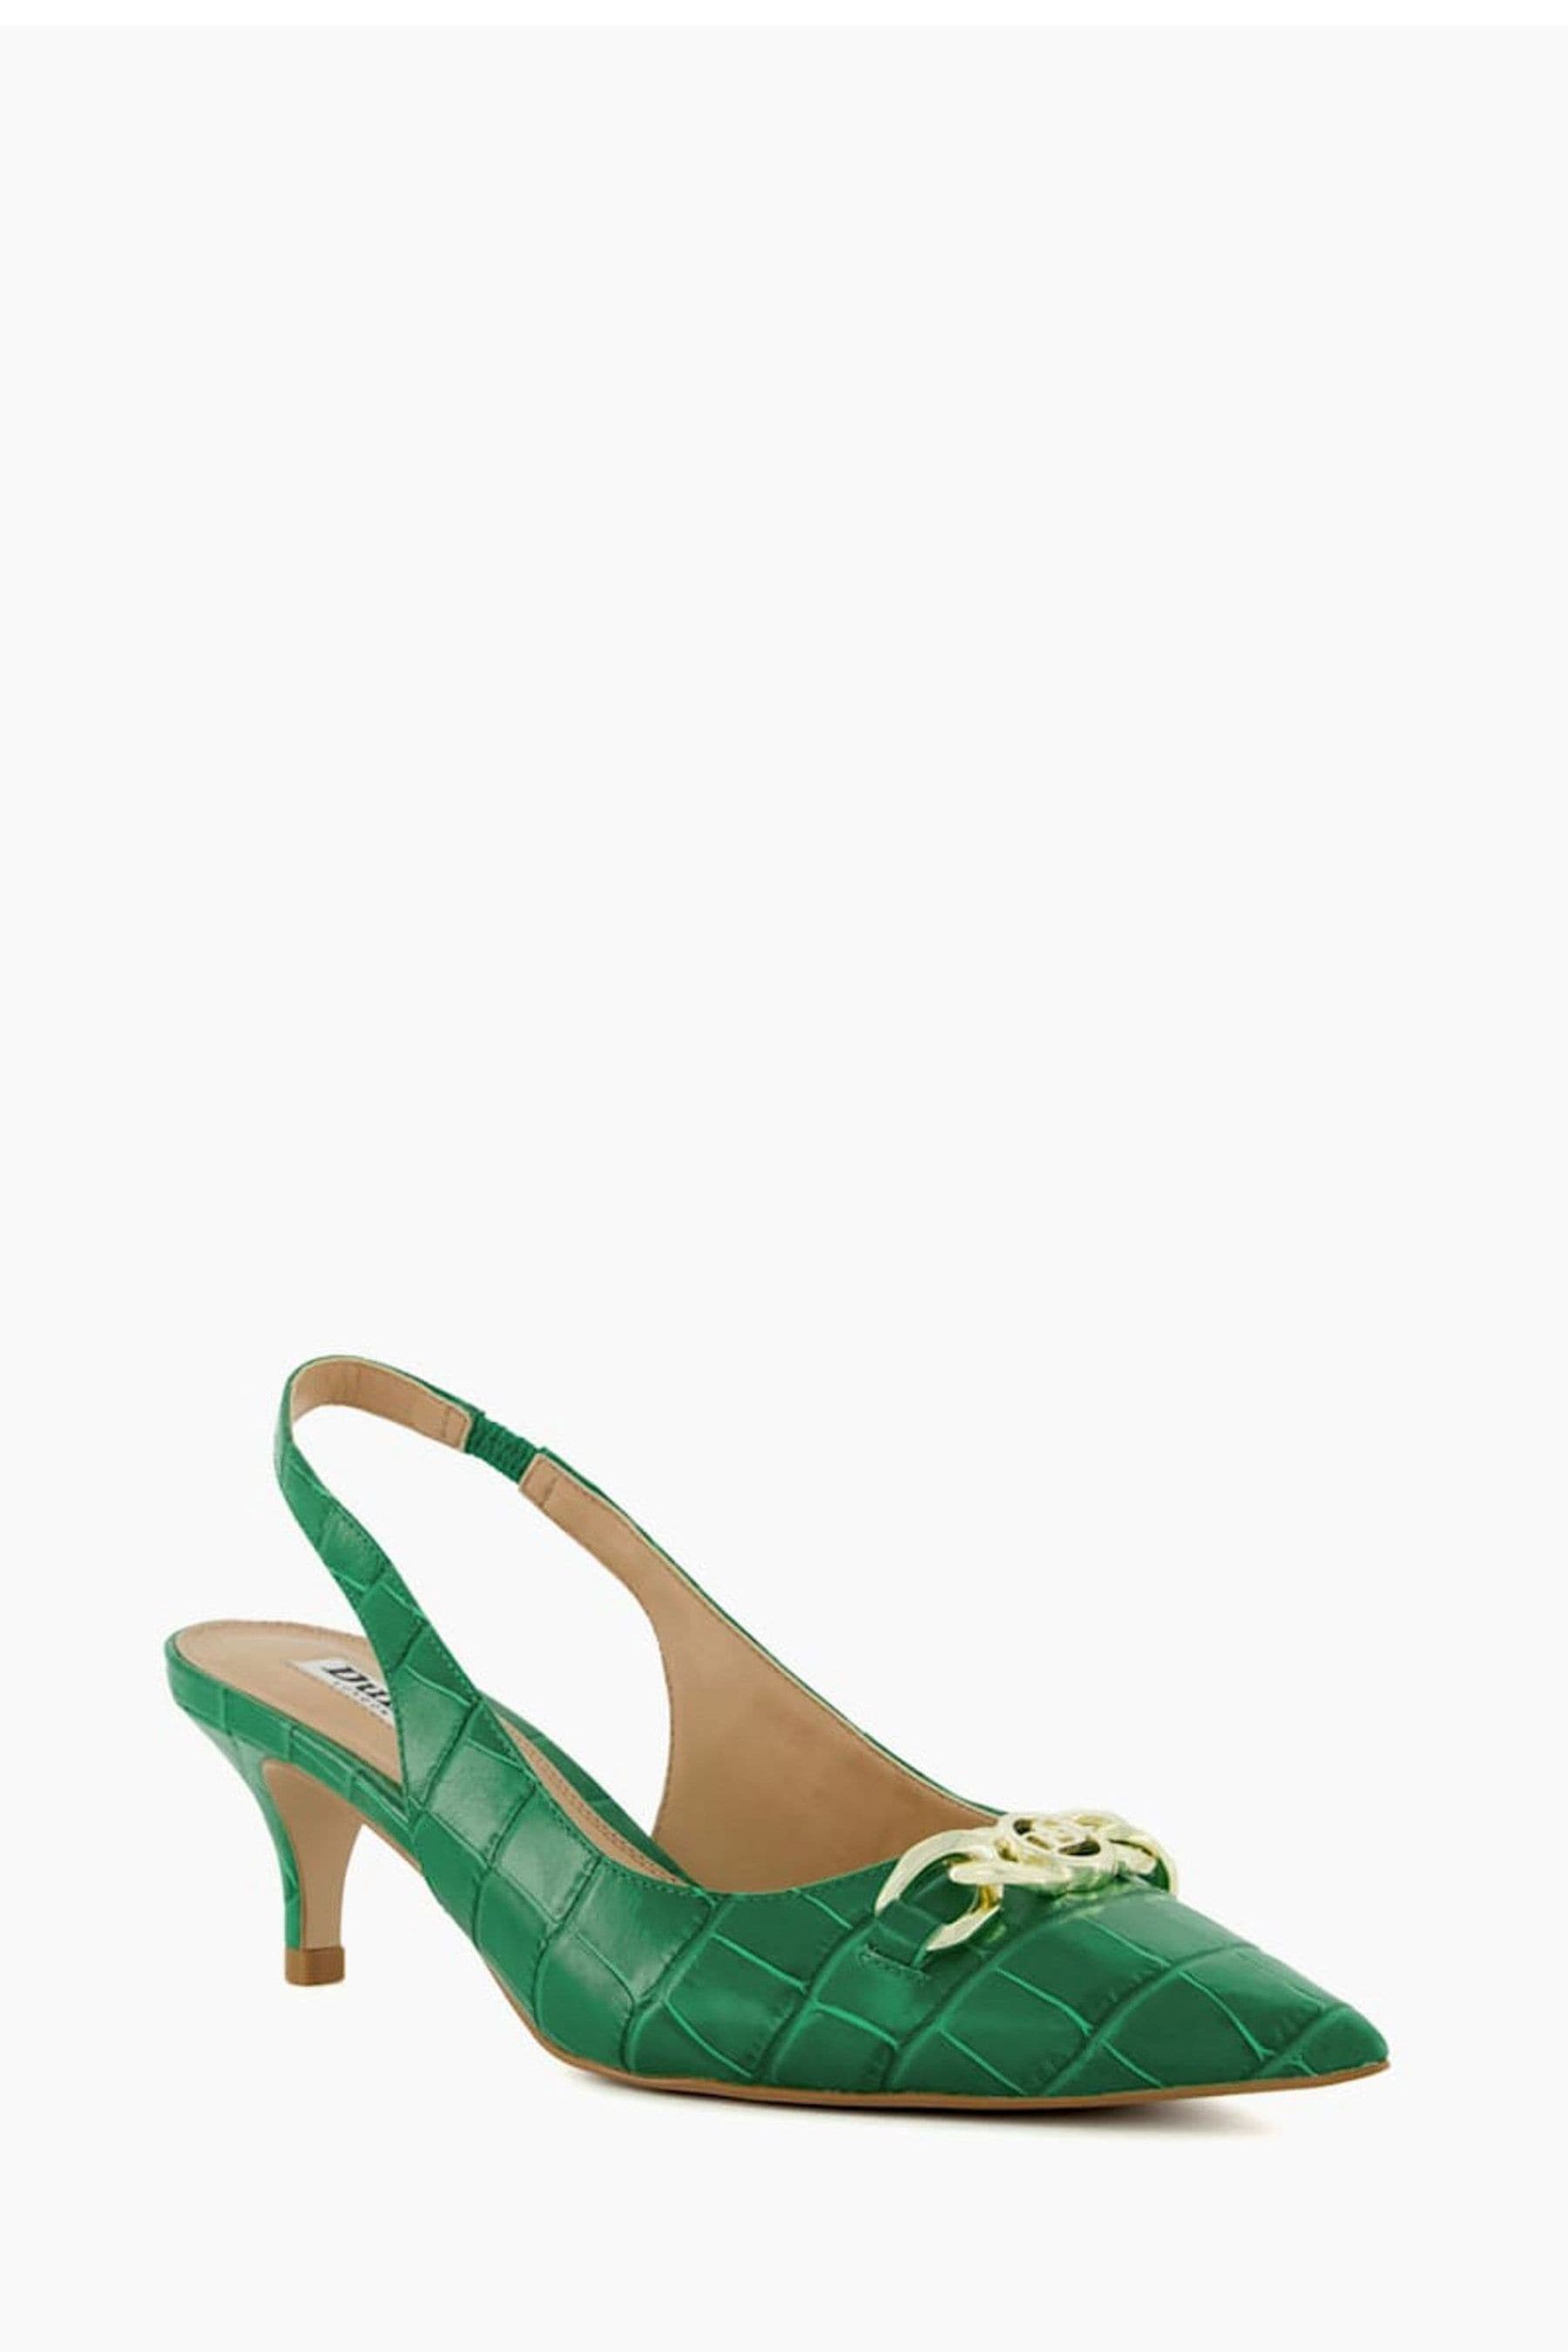 Buy Dune London Green Current Chain Front Slingback Court Shoes from ...